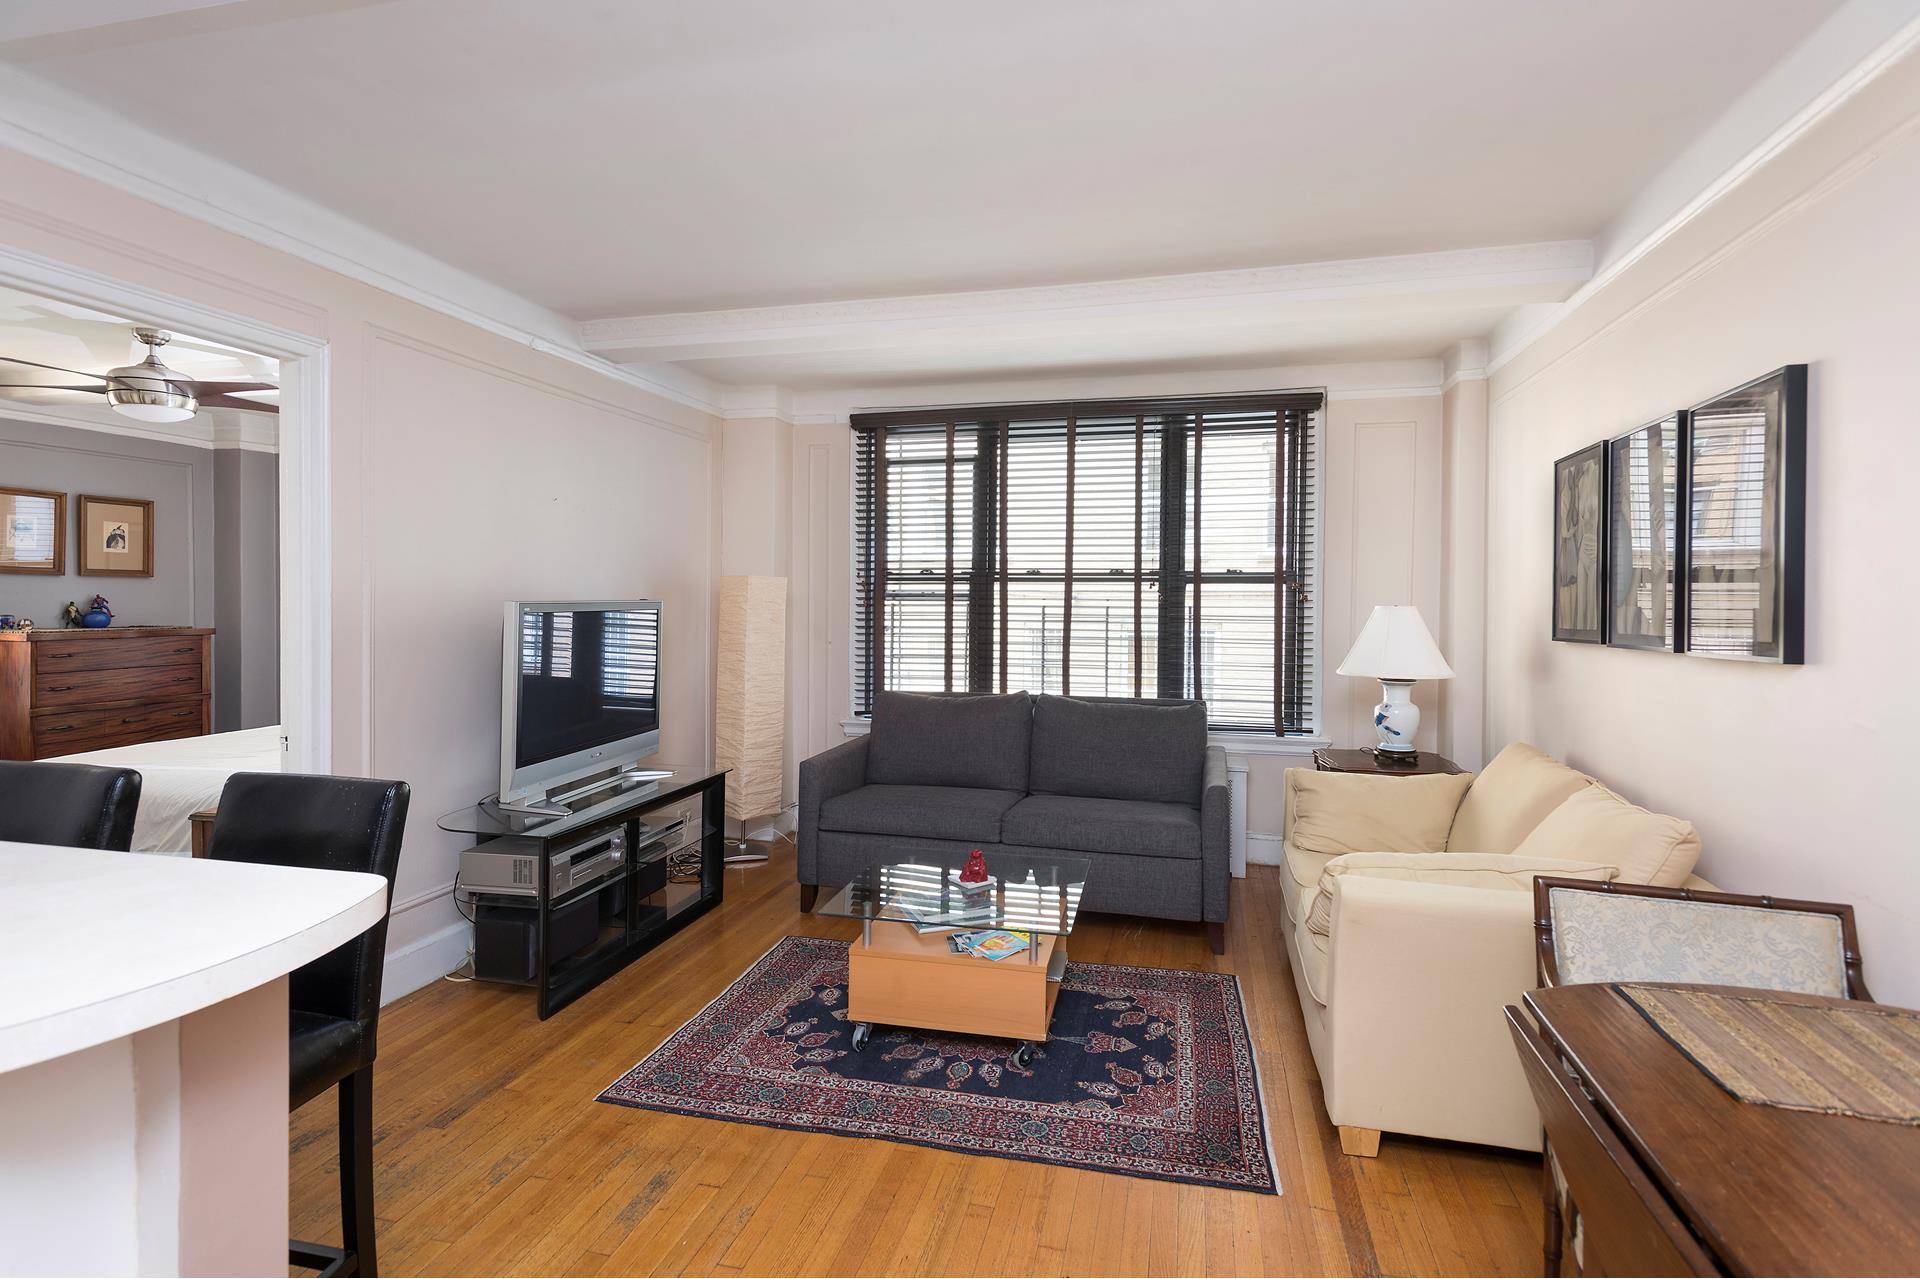 This charming prewar one bedroom, one bath apartment includes an entry foyer that leads into an opened updated kitchen with stainless steel appliances.